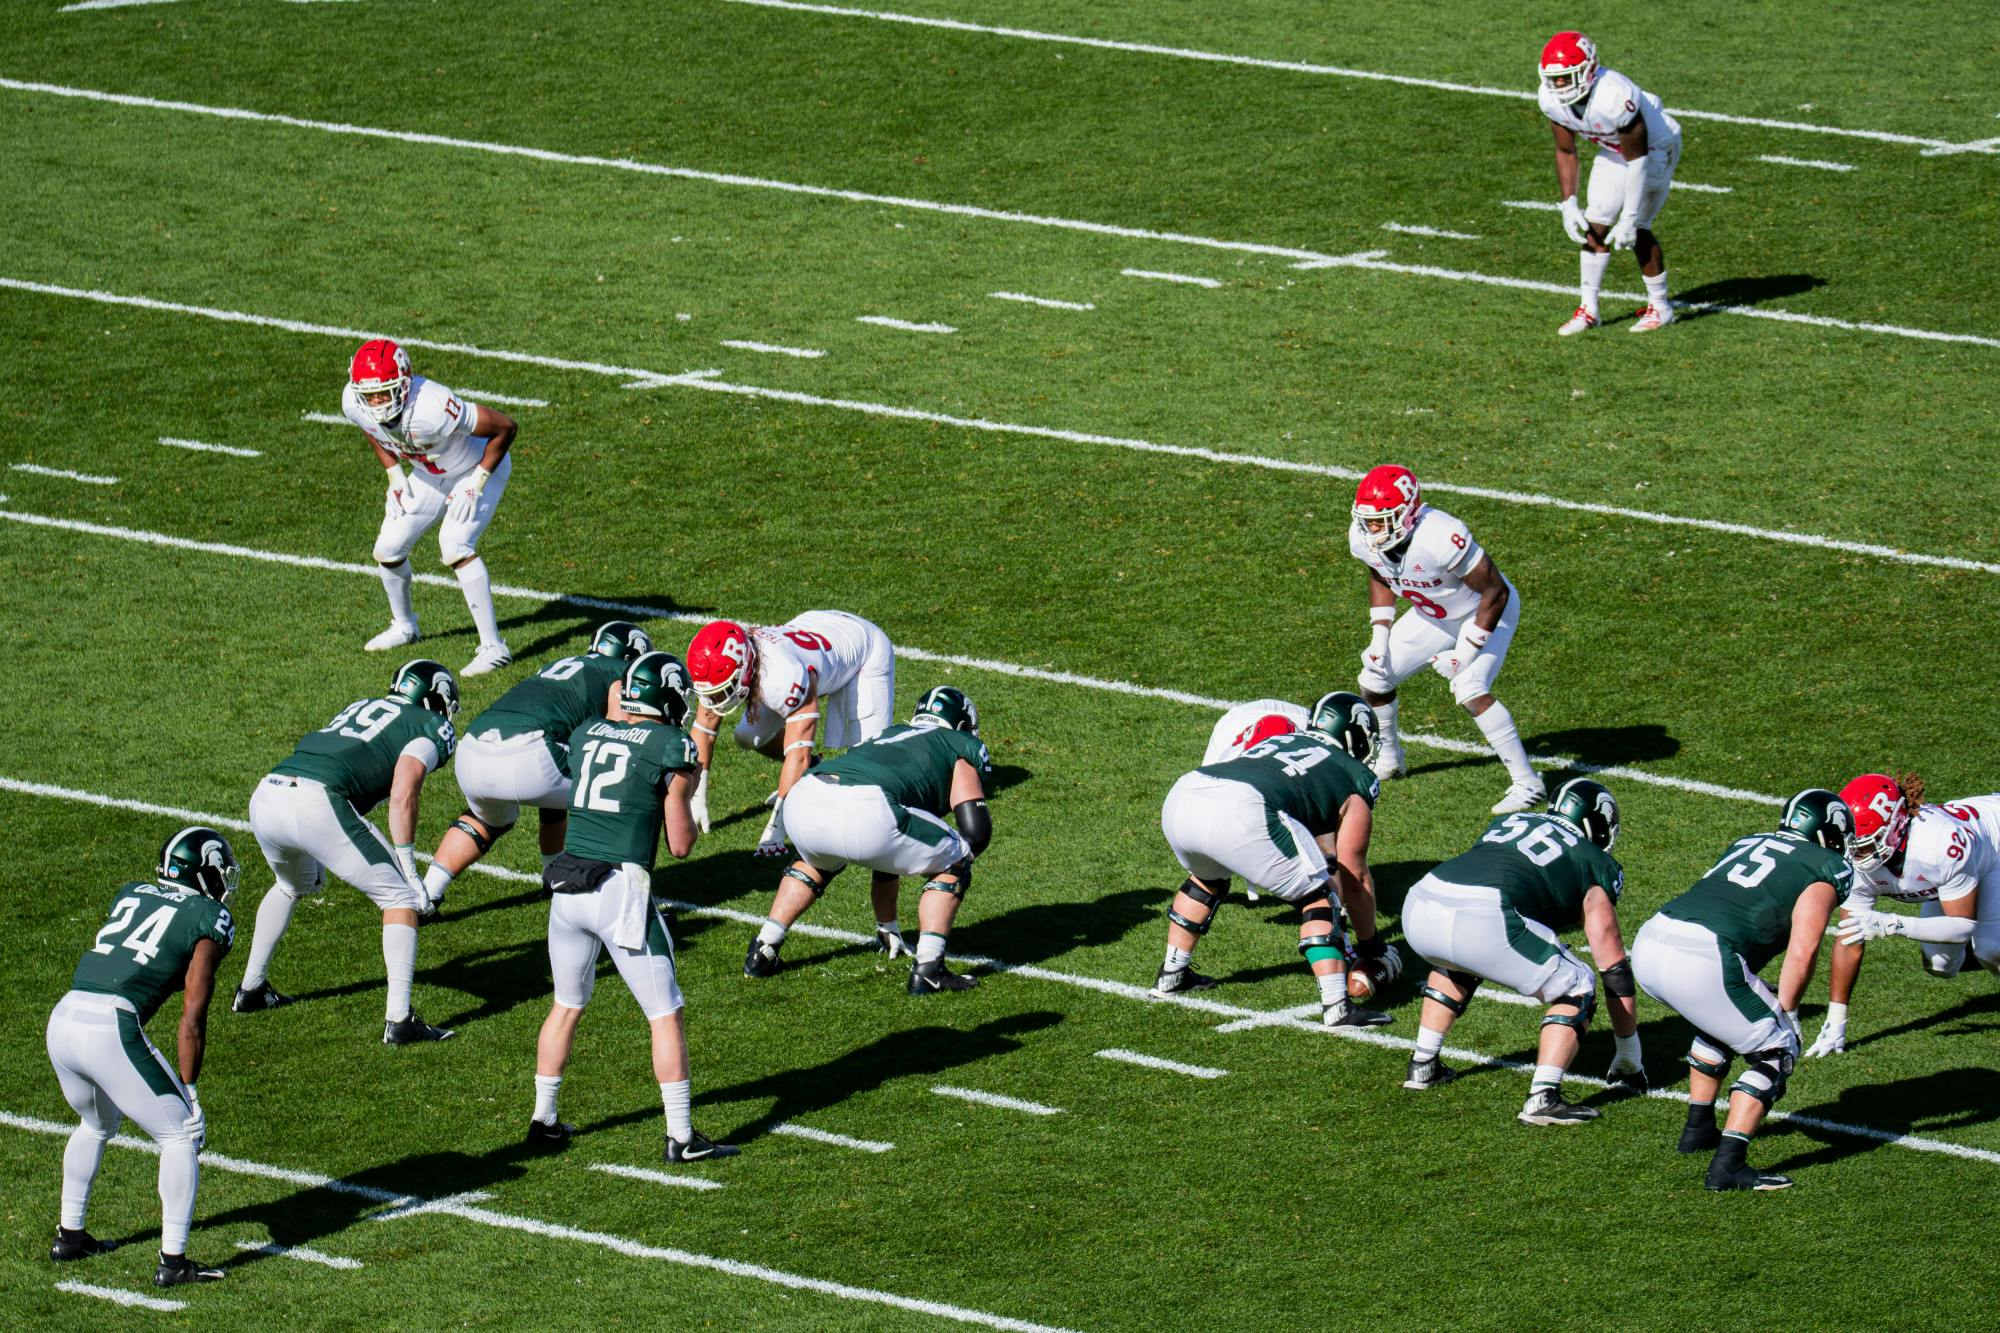 MSU takes posession during a game against Rutgers on Oct. 24, 2020.